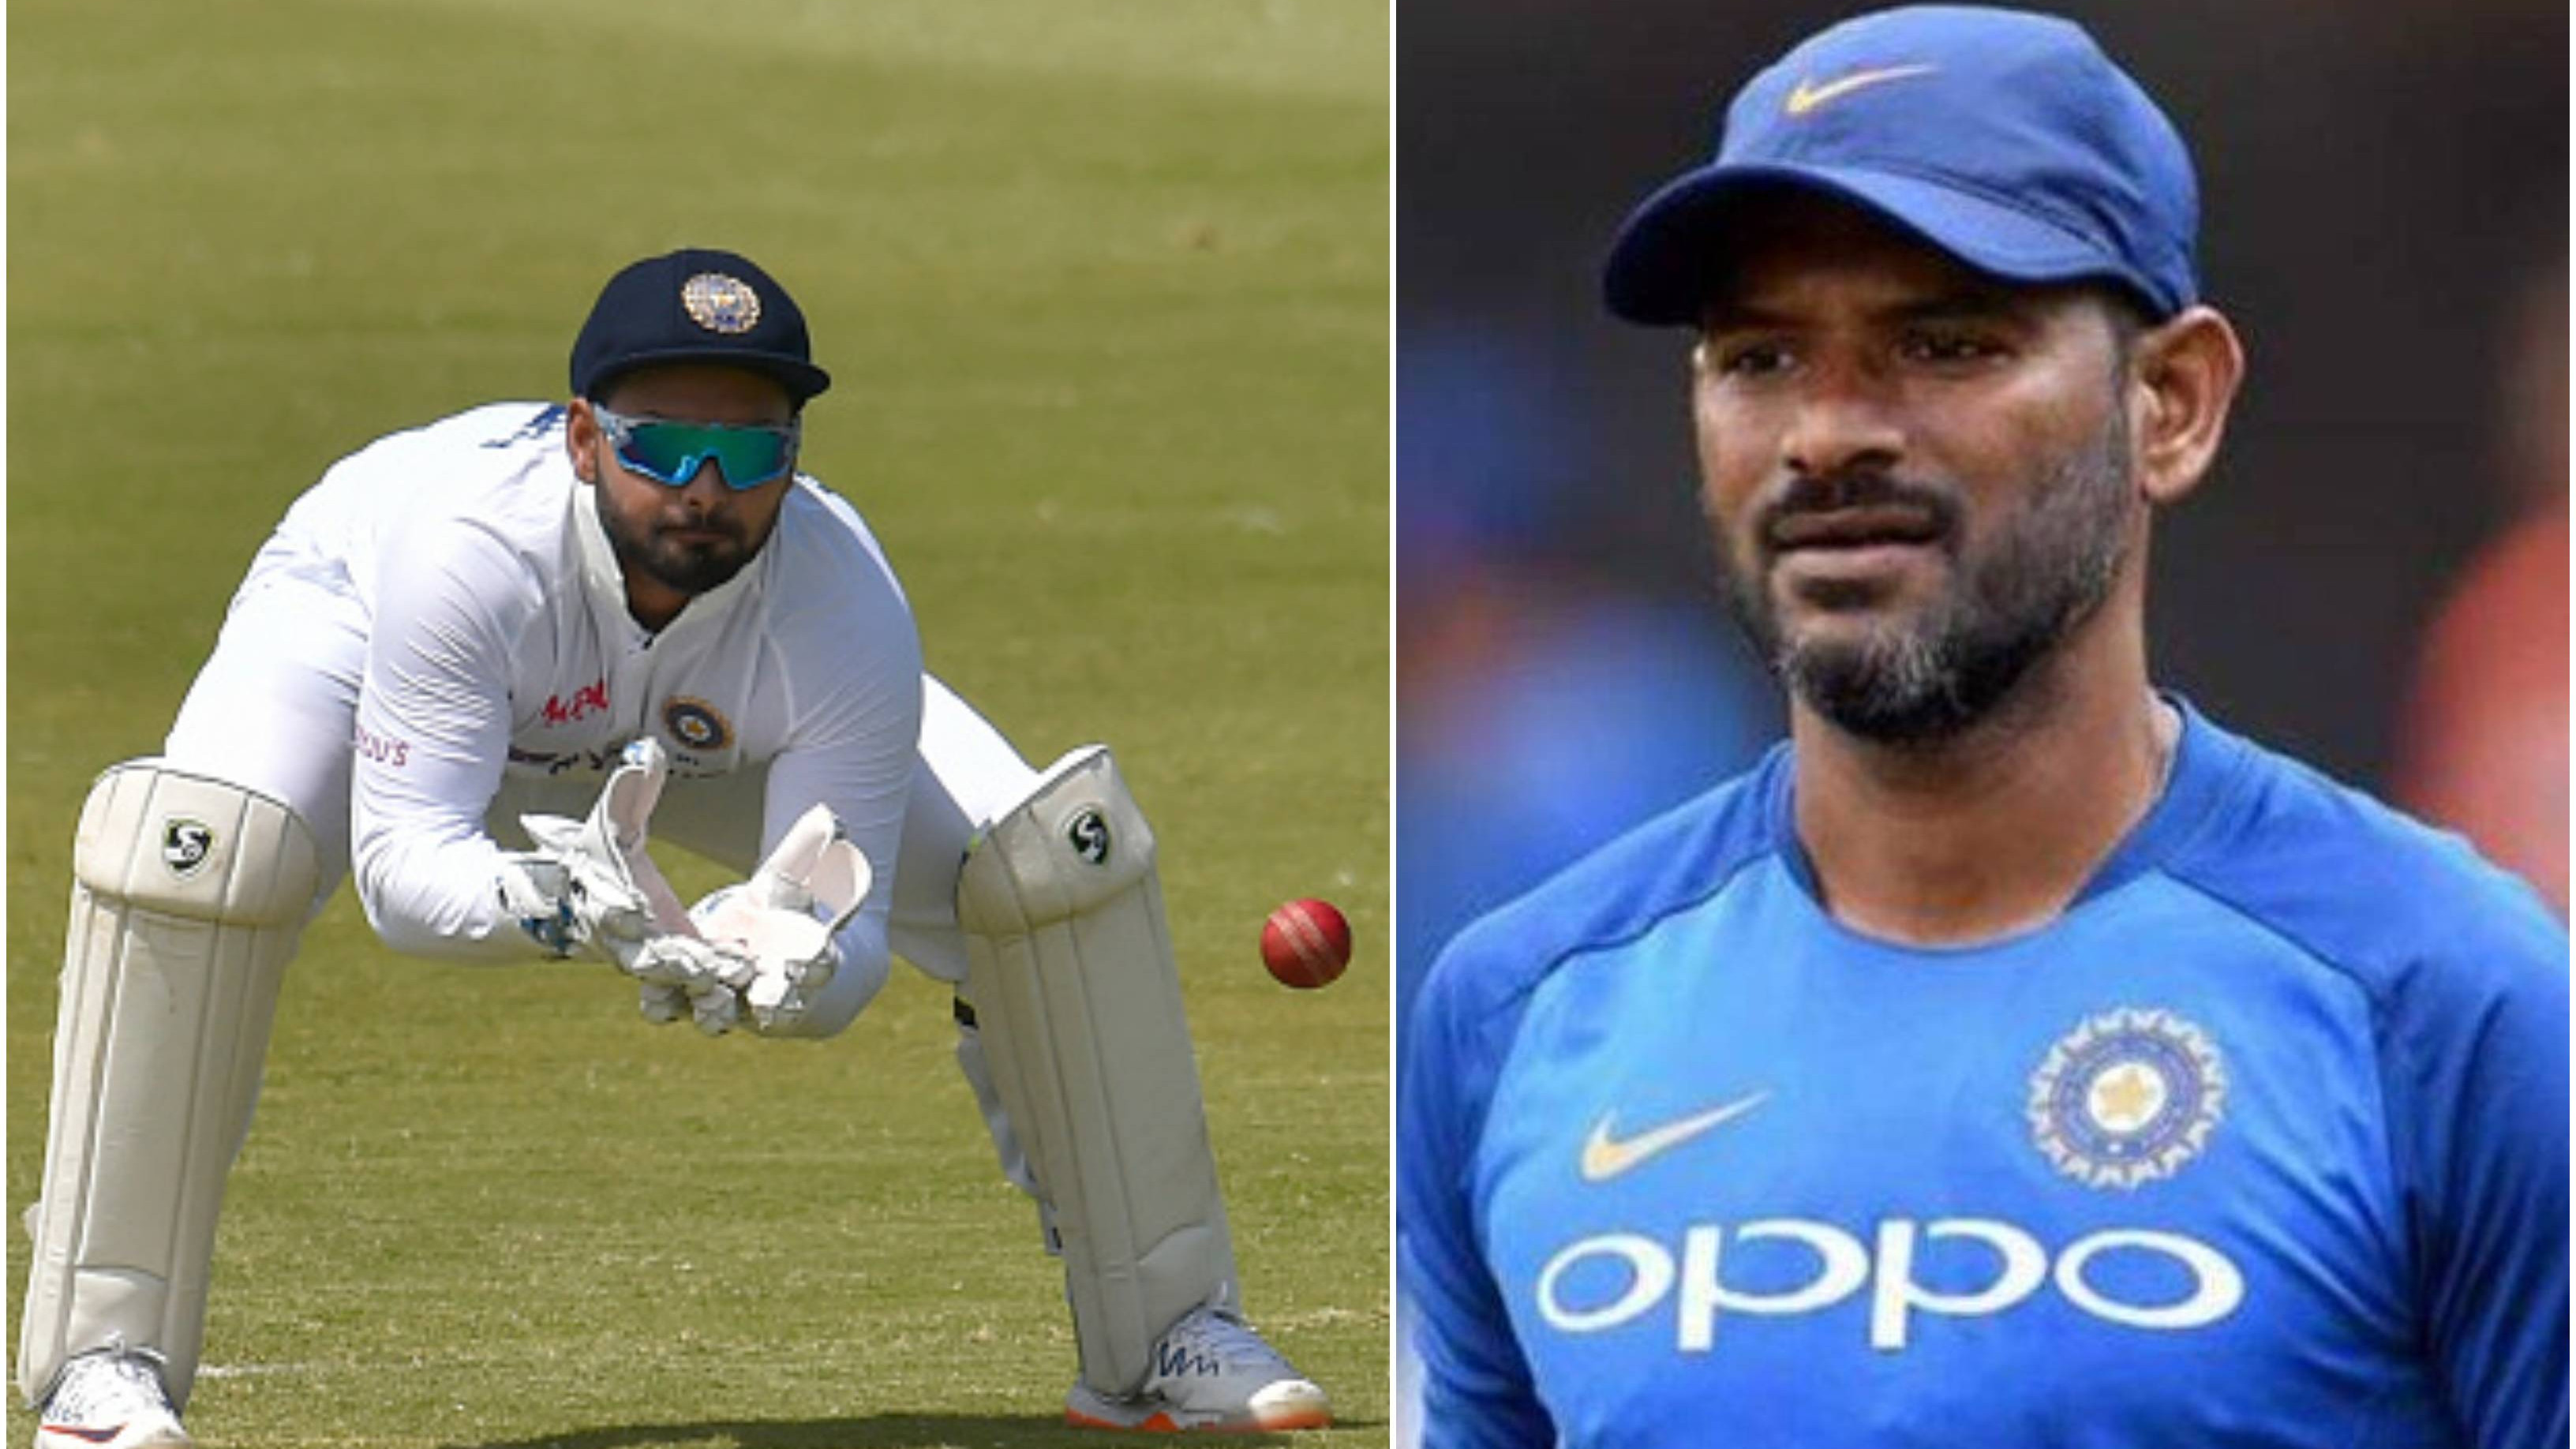 “Don't see any modern-day cricketer doing that’: R Sridhar on Rishabh Pant’s hard work to improve his keeping